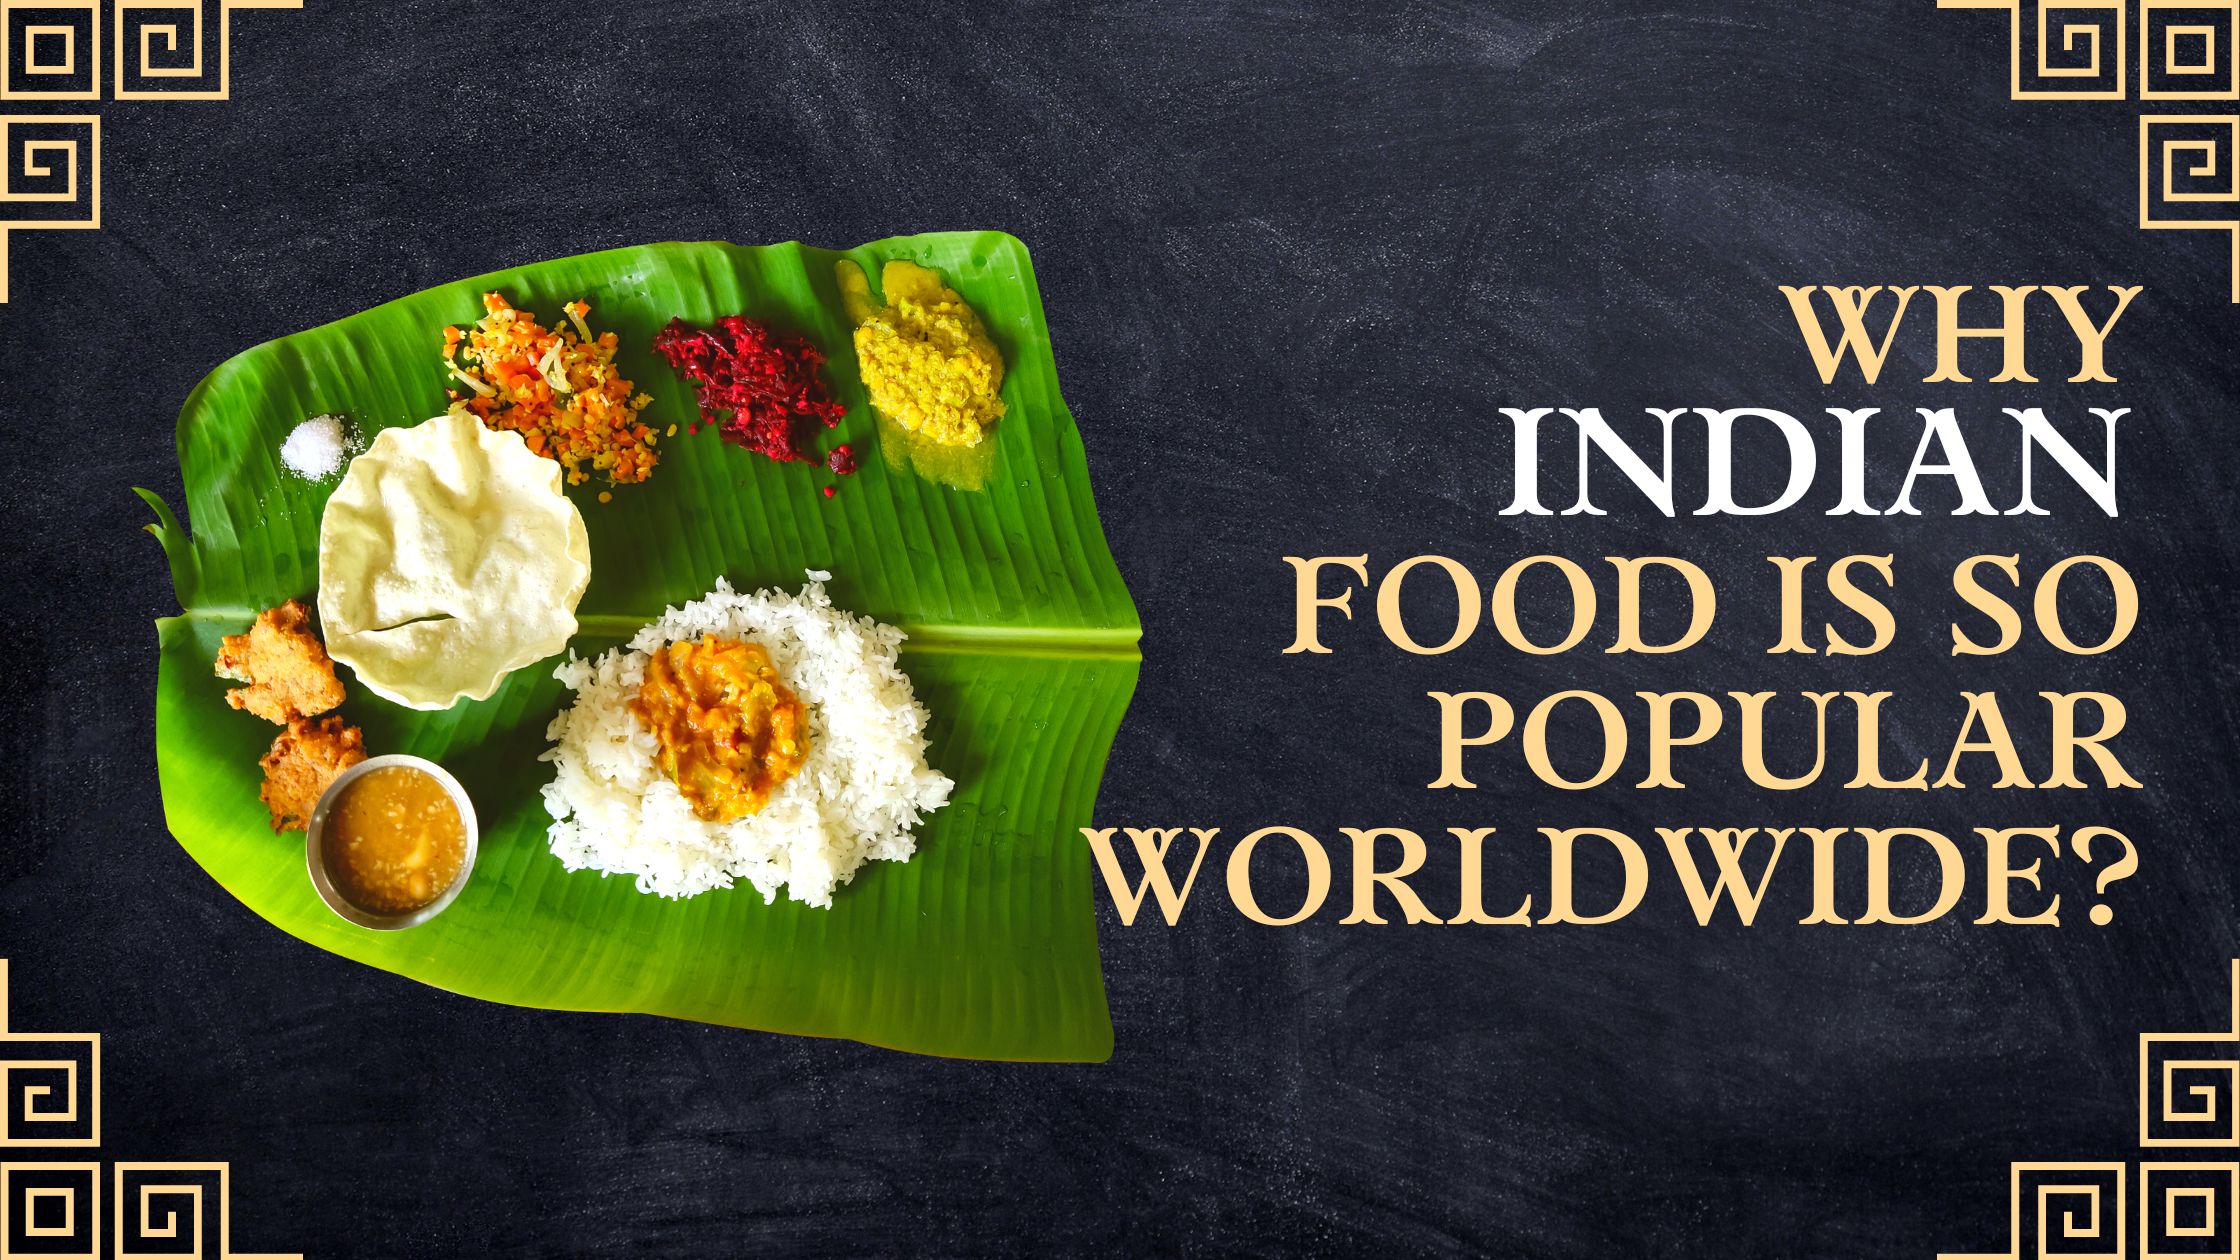 Why Indian Food is So Popular Worldwide?